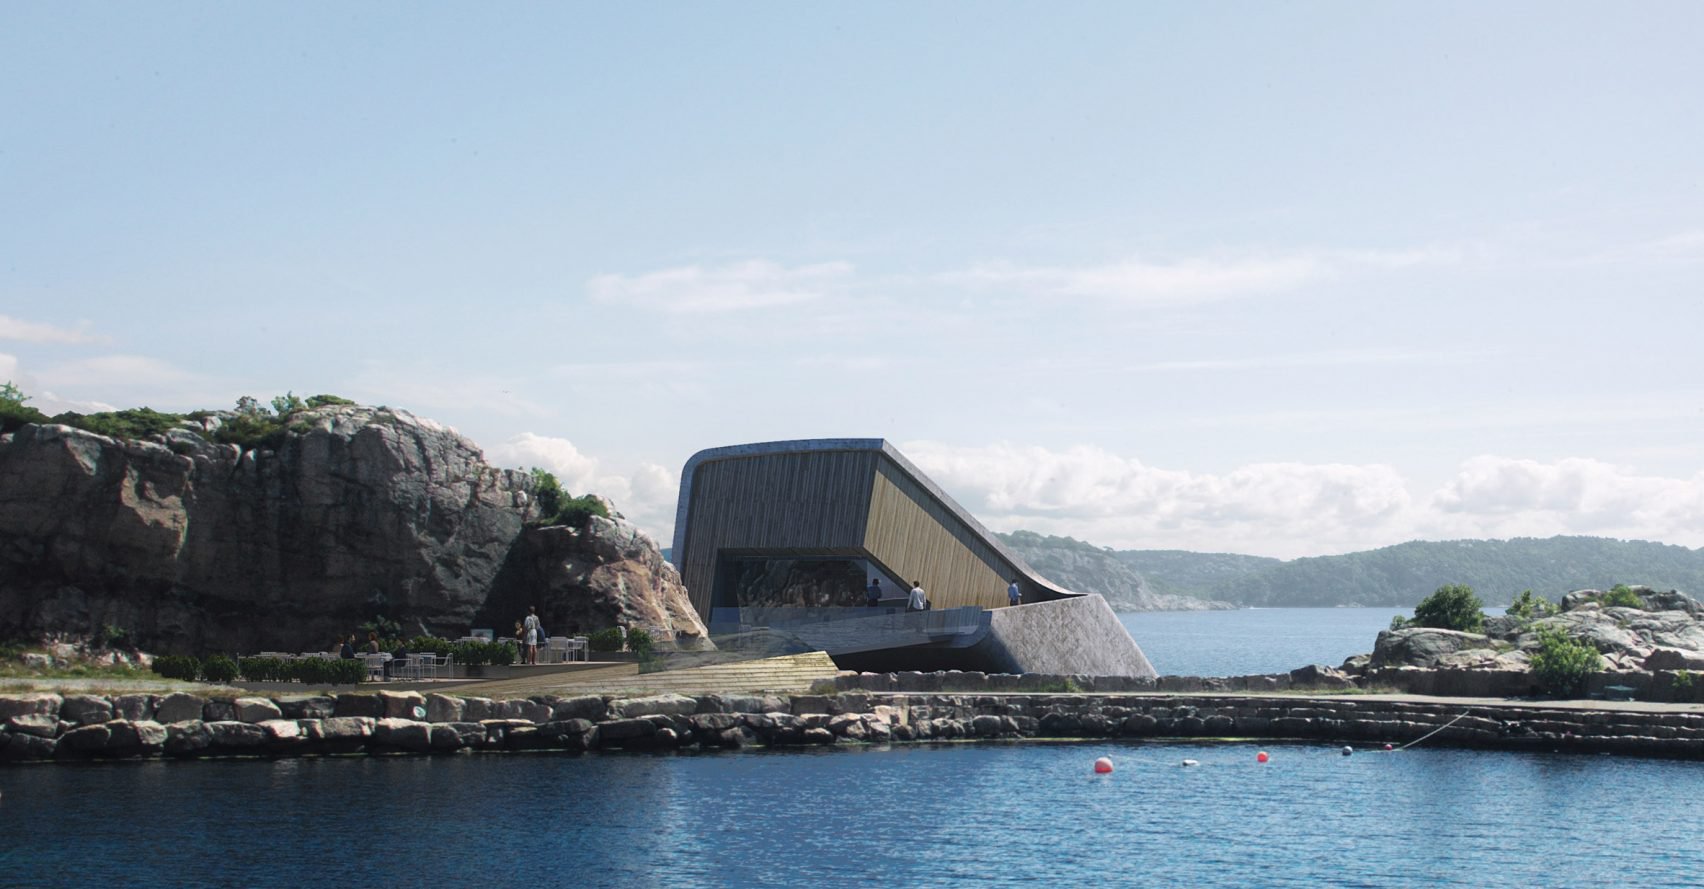 Snohetta has designed Europe's first under water restaurant and research center in Norway.